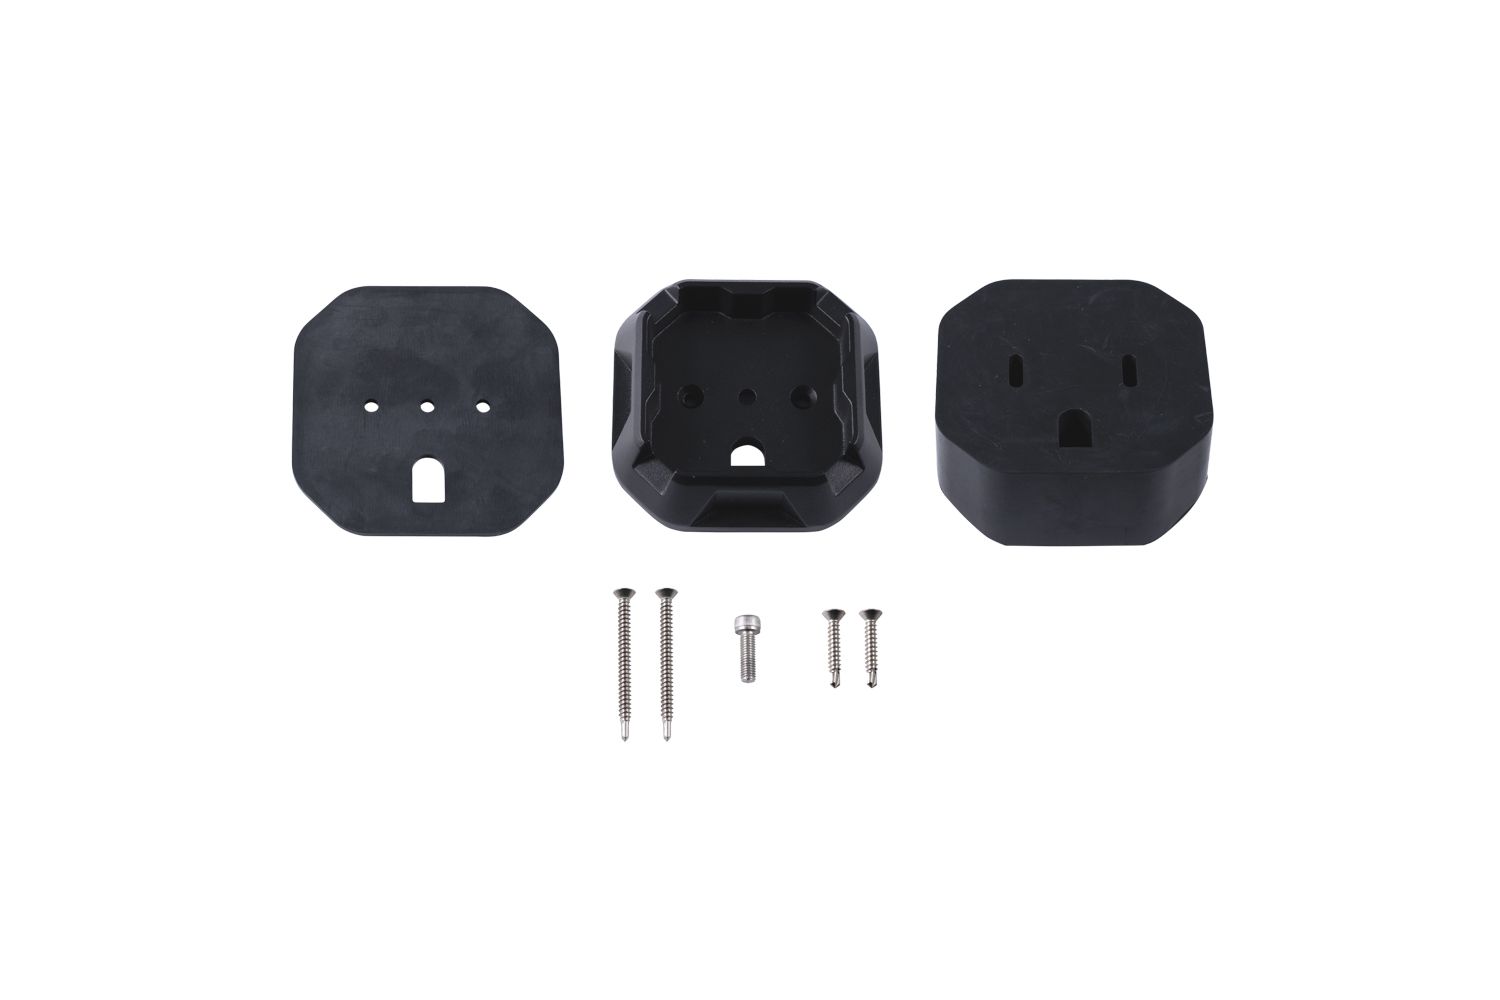 Stage Series Rock Light Surface Mount Adapter Kit (one)-DD7462